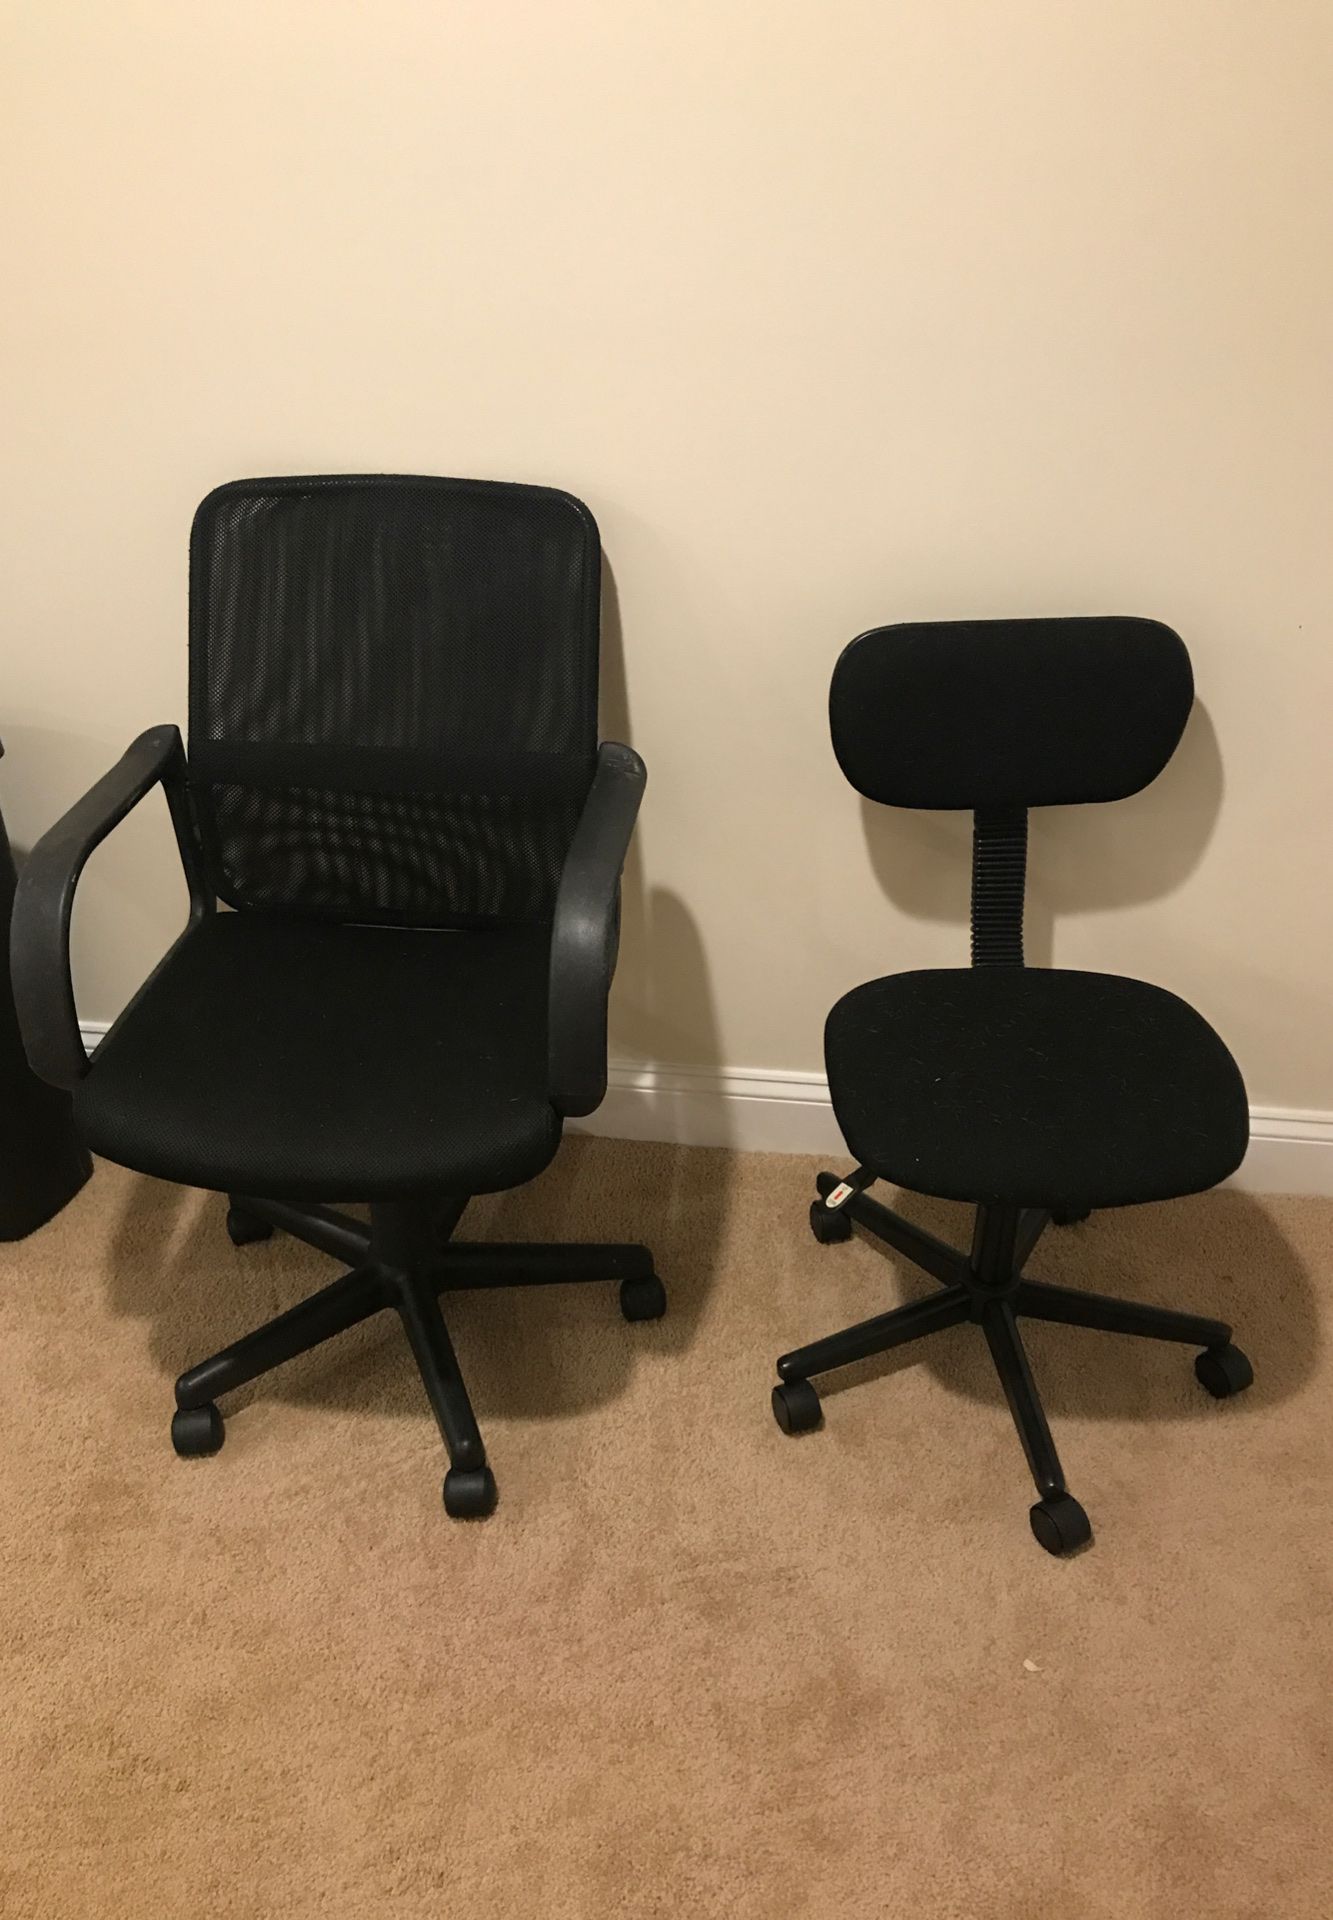 2 office desk chairs